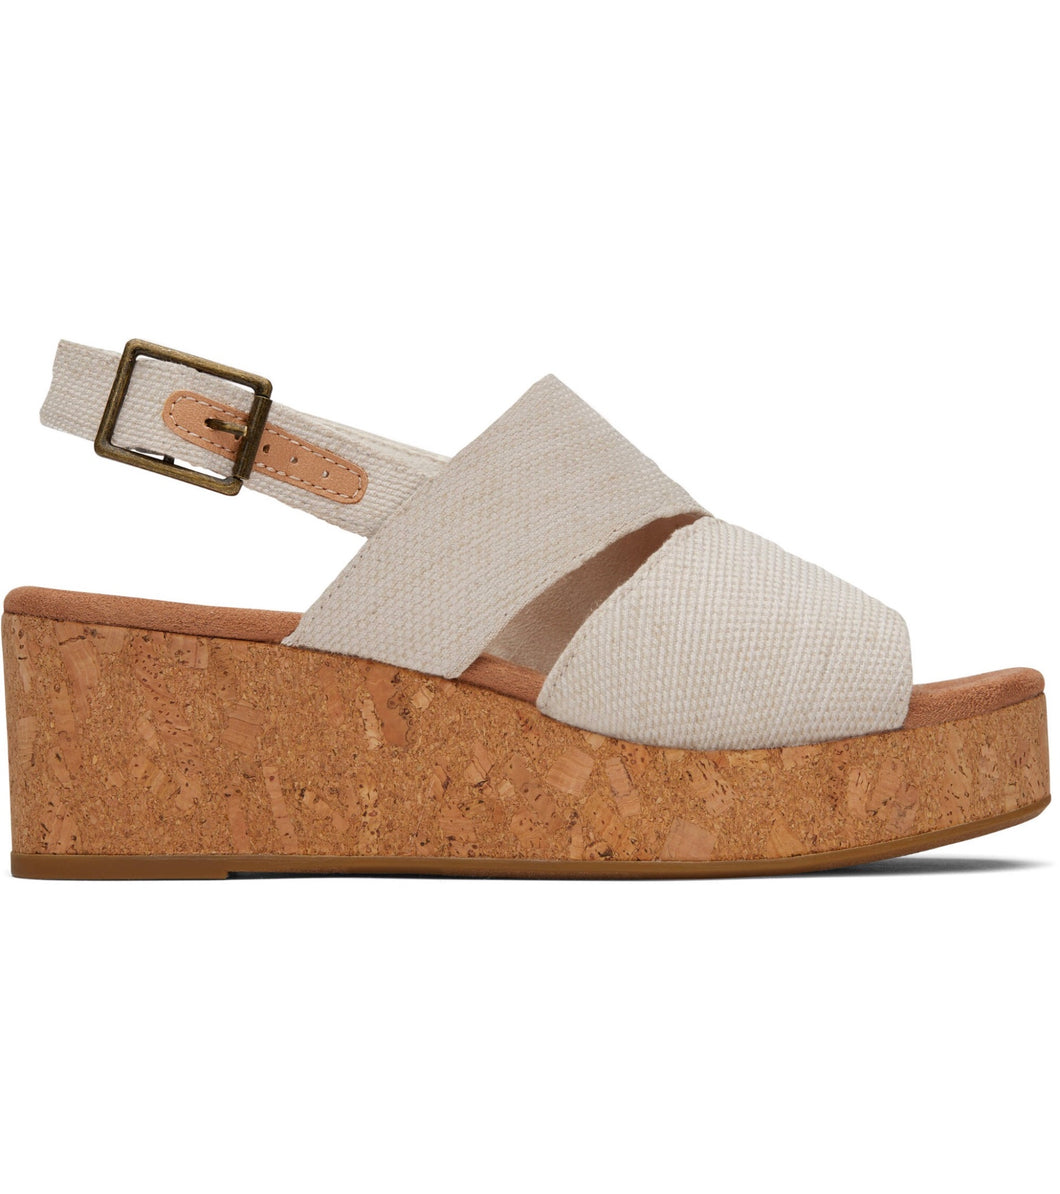 TOMS: Claudine Wedge in Natural Yarn